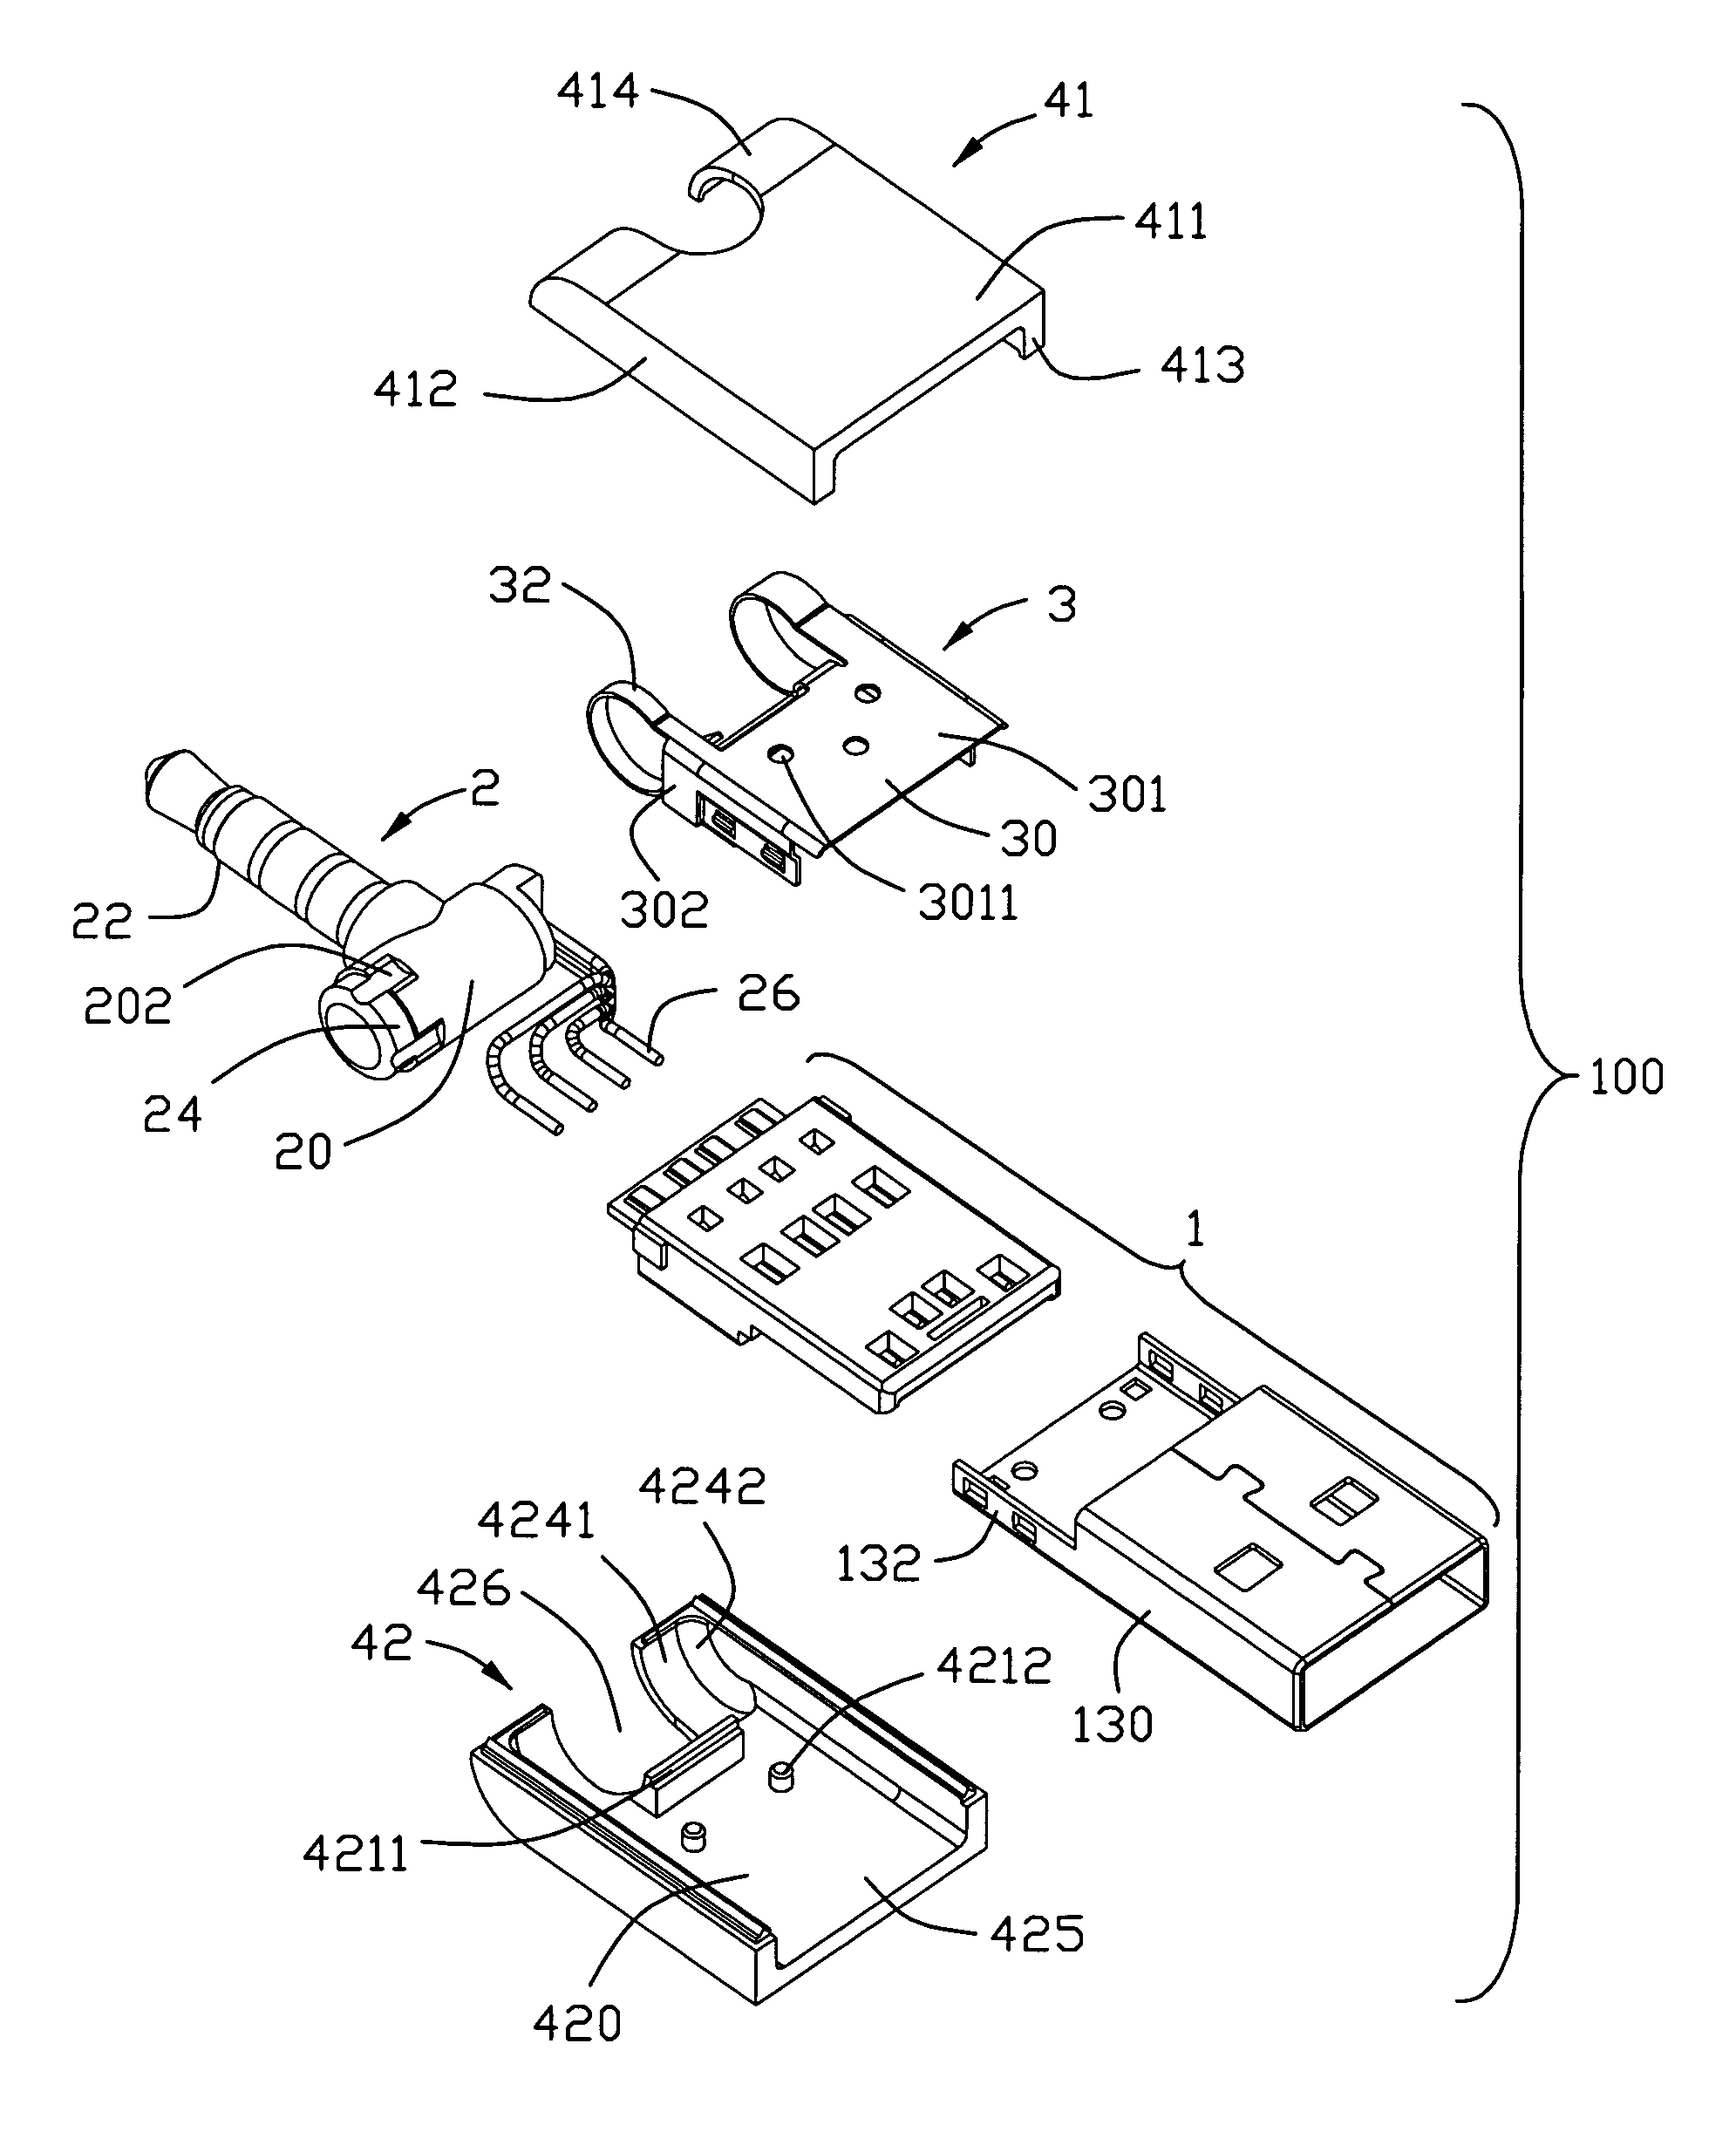 Rotatable electrical interconnection device